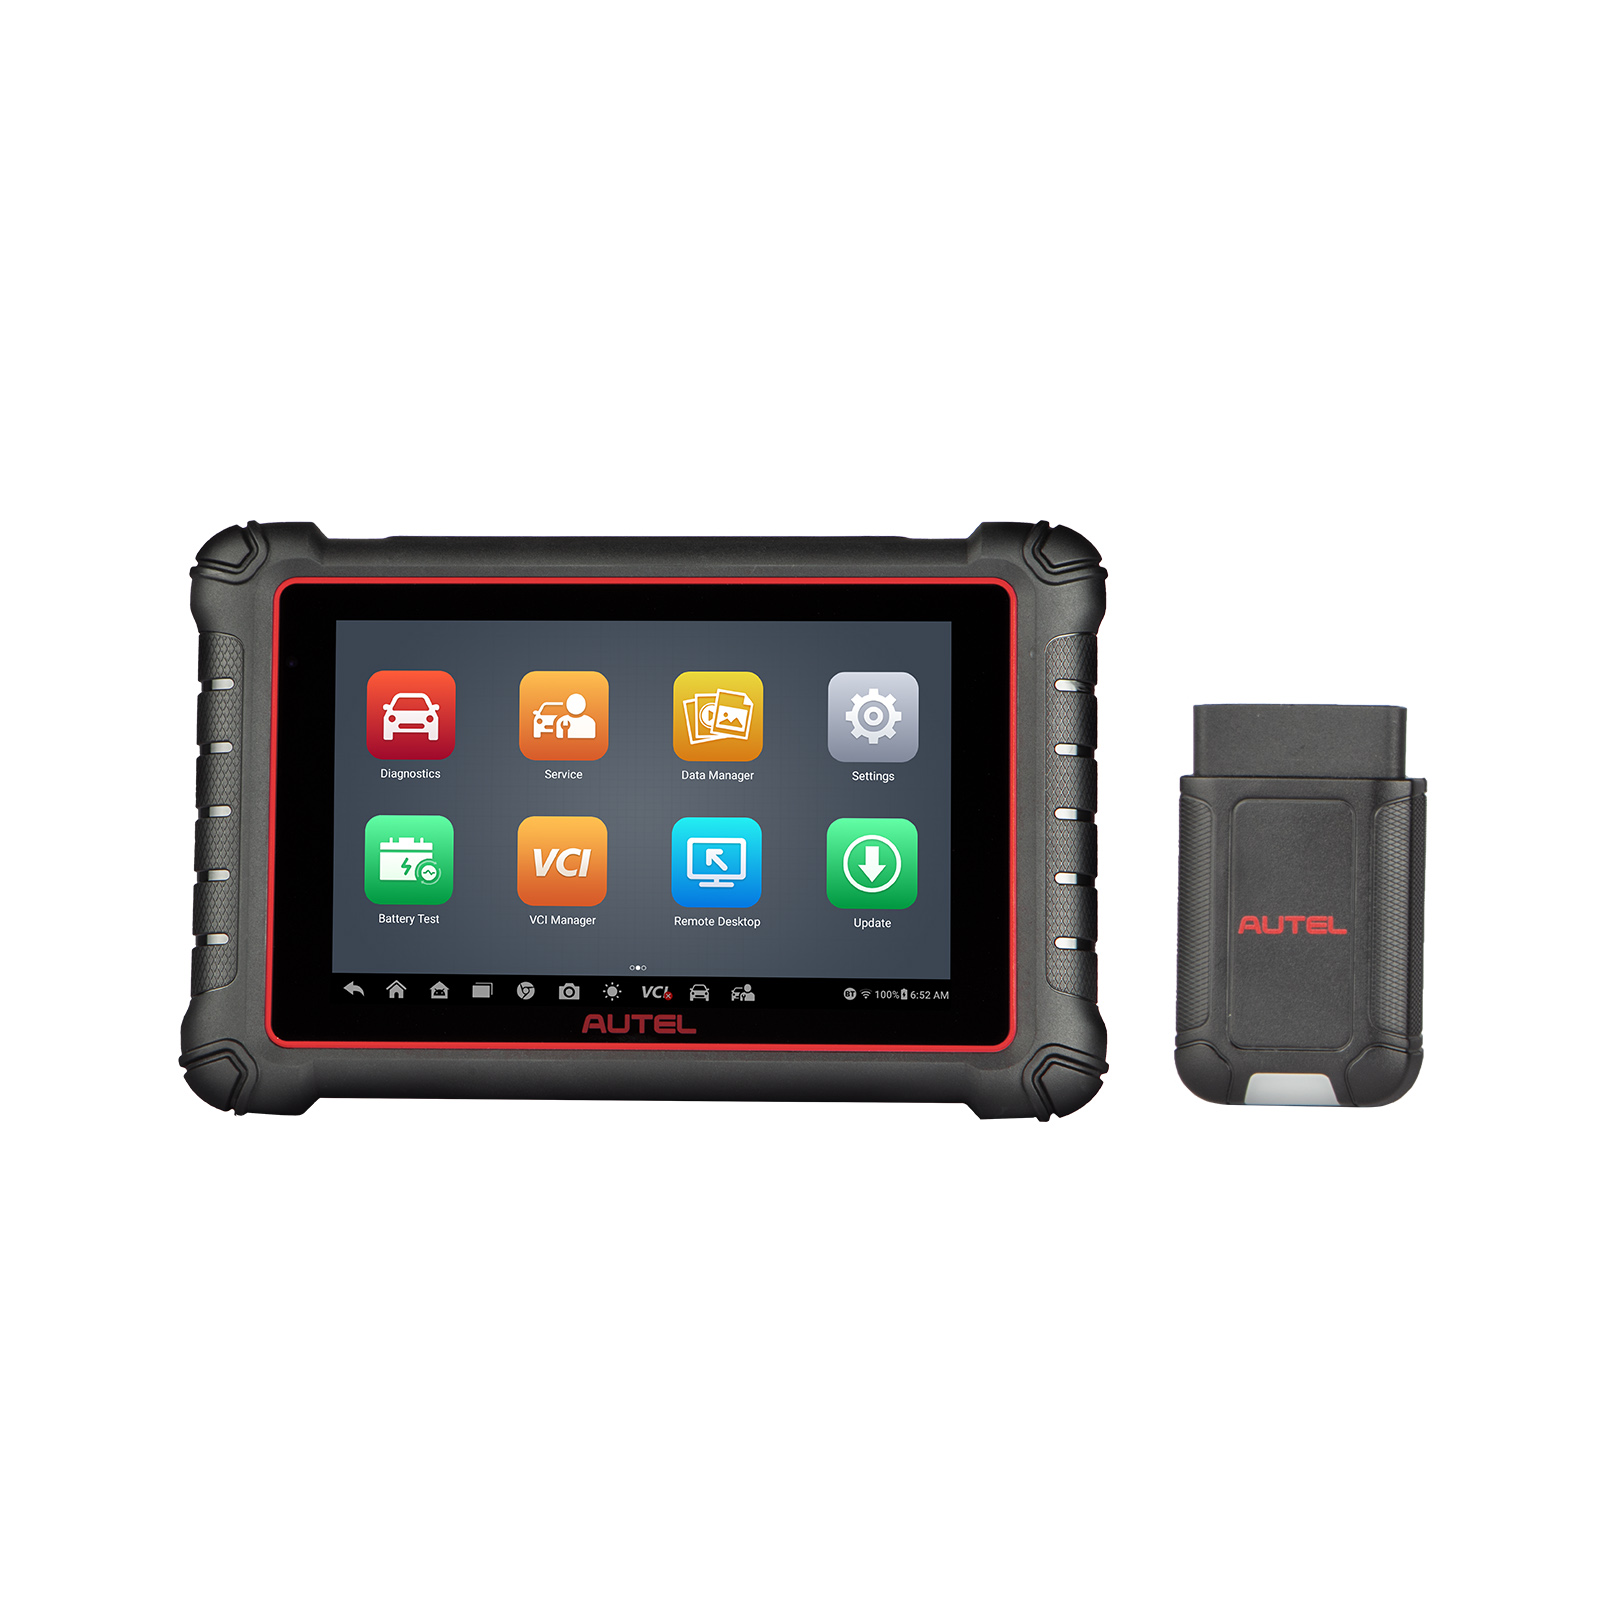 Autel MaxiPro MP900Z BT (MP900 BT) Diagnostic Scanner Supports ECU Coding, Pre & Post Scan, DoIP CAN FD Protocols, Upgraded Ver. Of MP808BT PRO